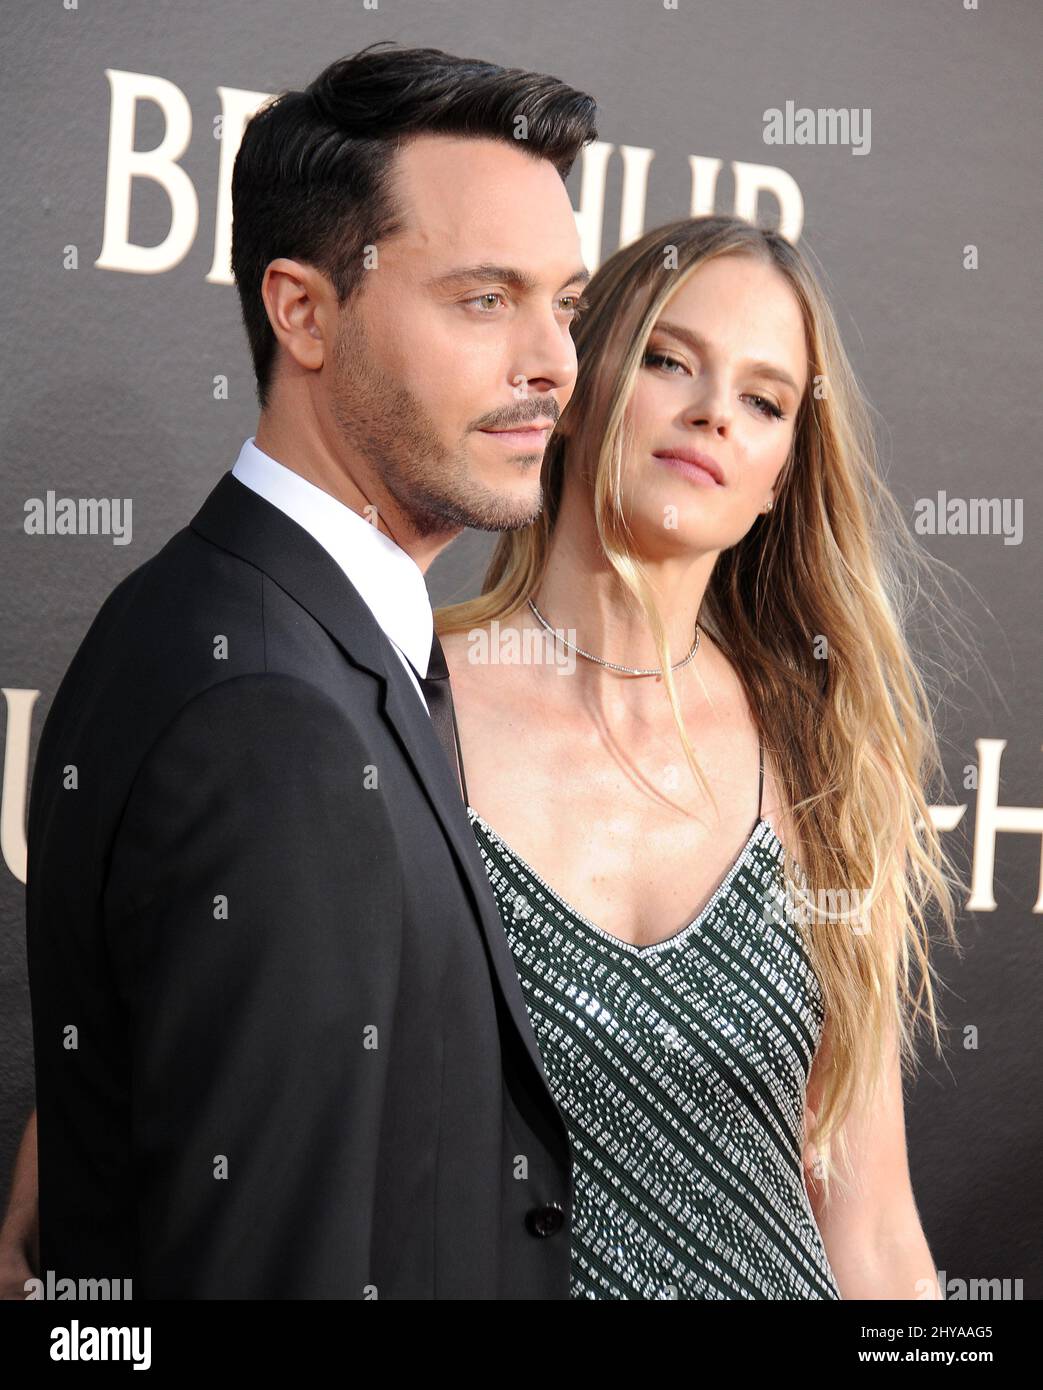 Jack Huston, Shannan Click attends the 'Ben-Hur' Los Angeles Premiere held at TCL Chinese Stock Photo